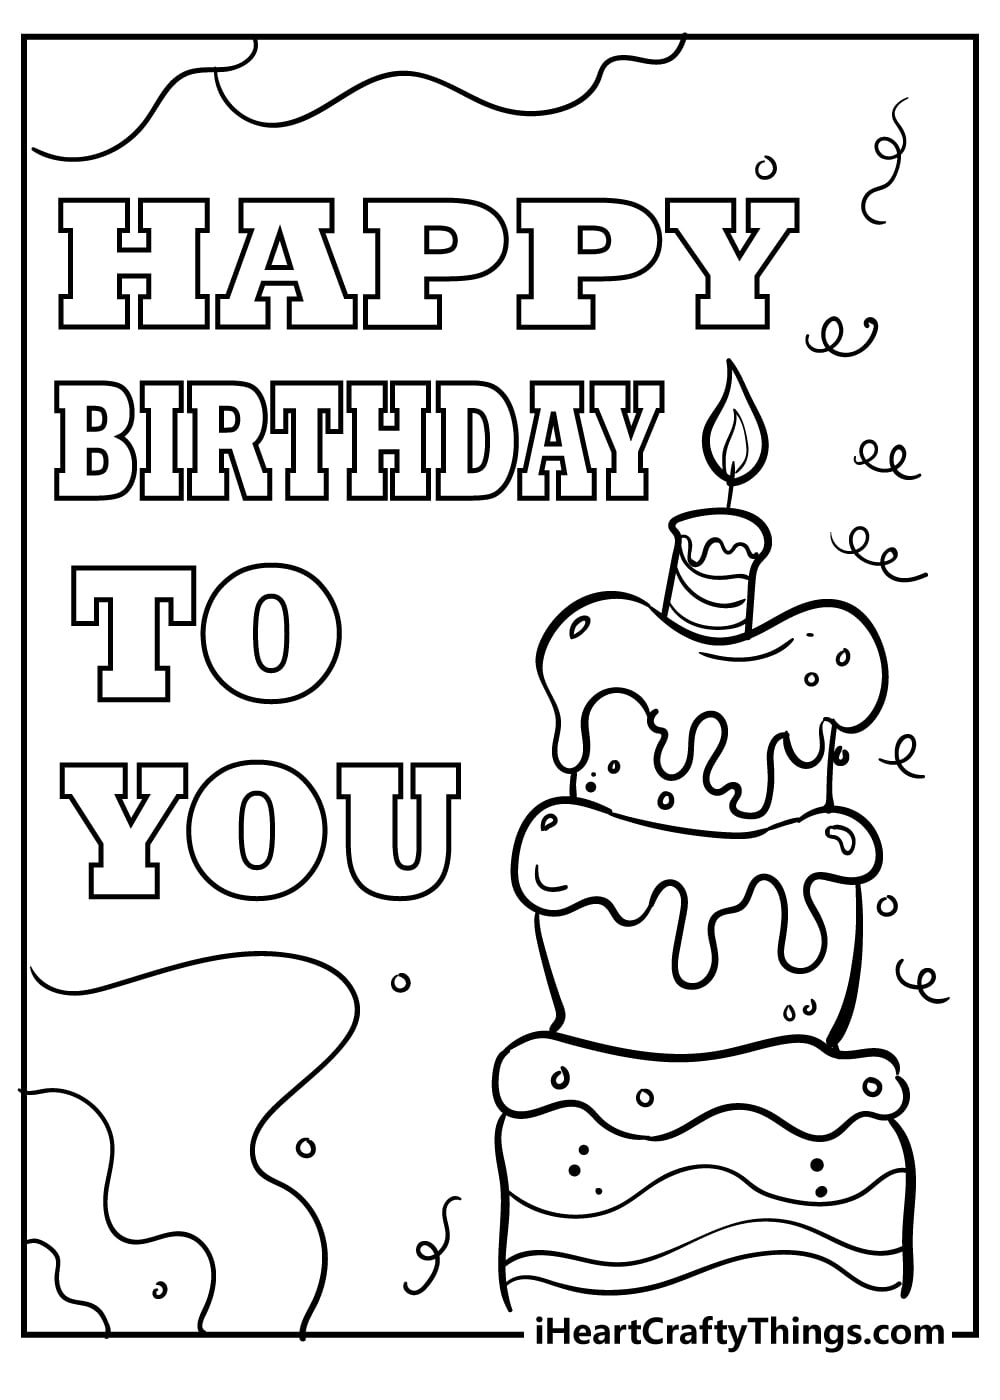 Printable Birthday Cards Colouring